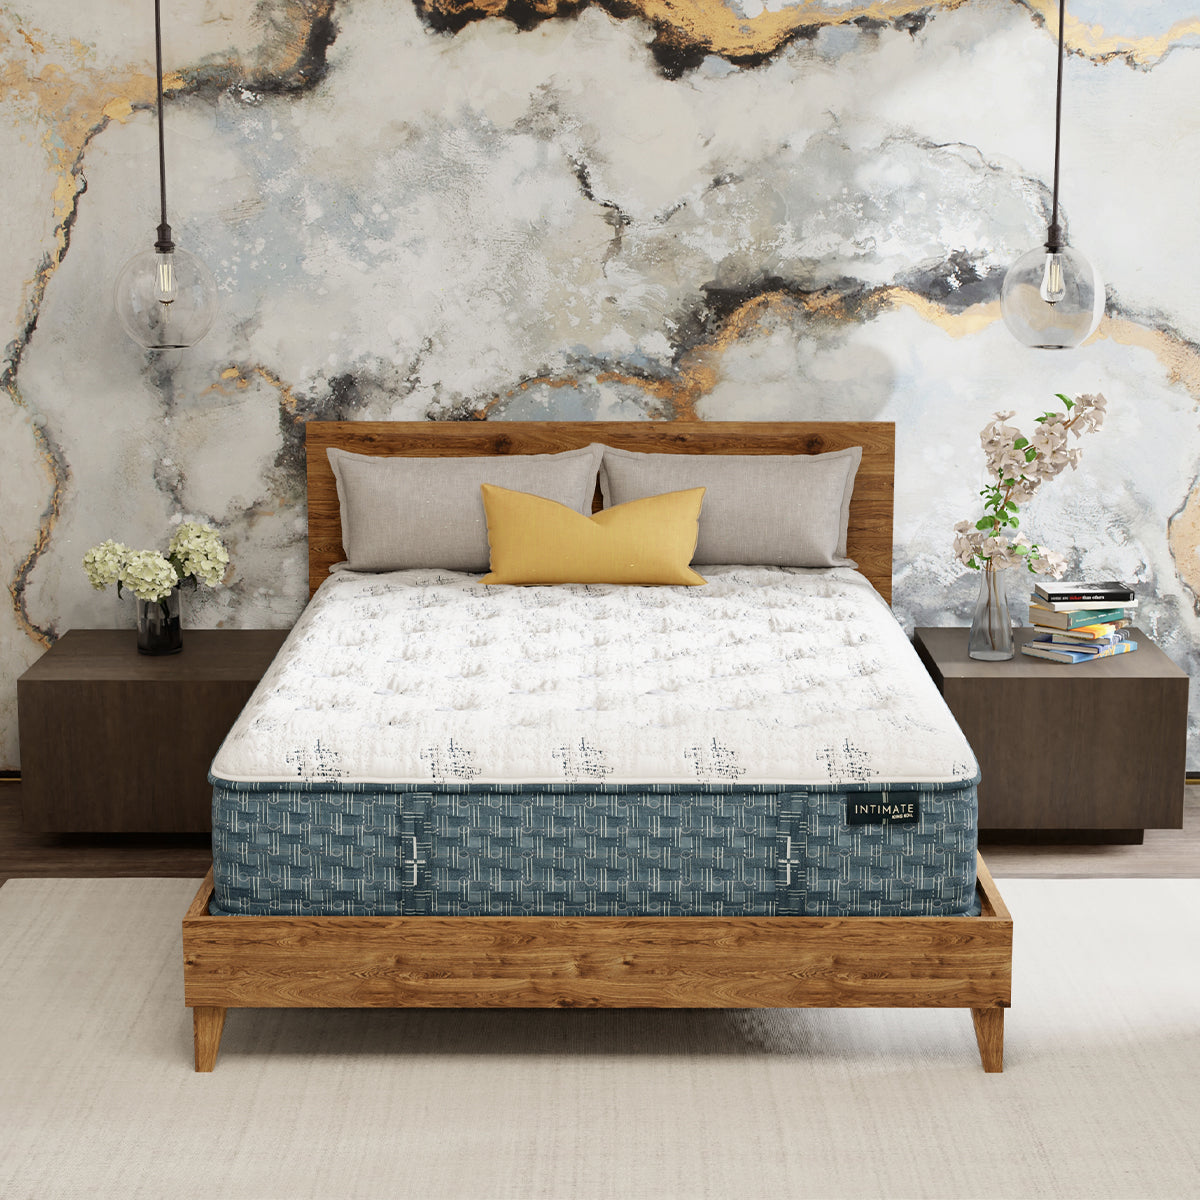 King Koil Crisfield Firm mattress on wooden platform bed in an upscale modern bedroom with wooden end tables and Edison globe lamps.